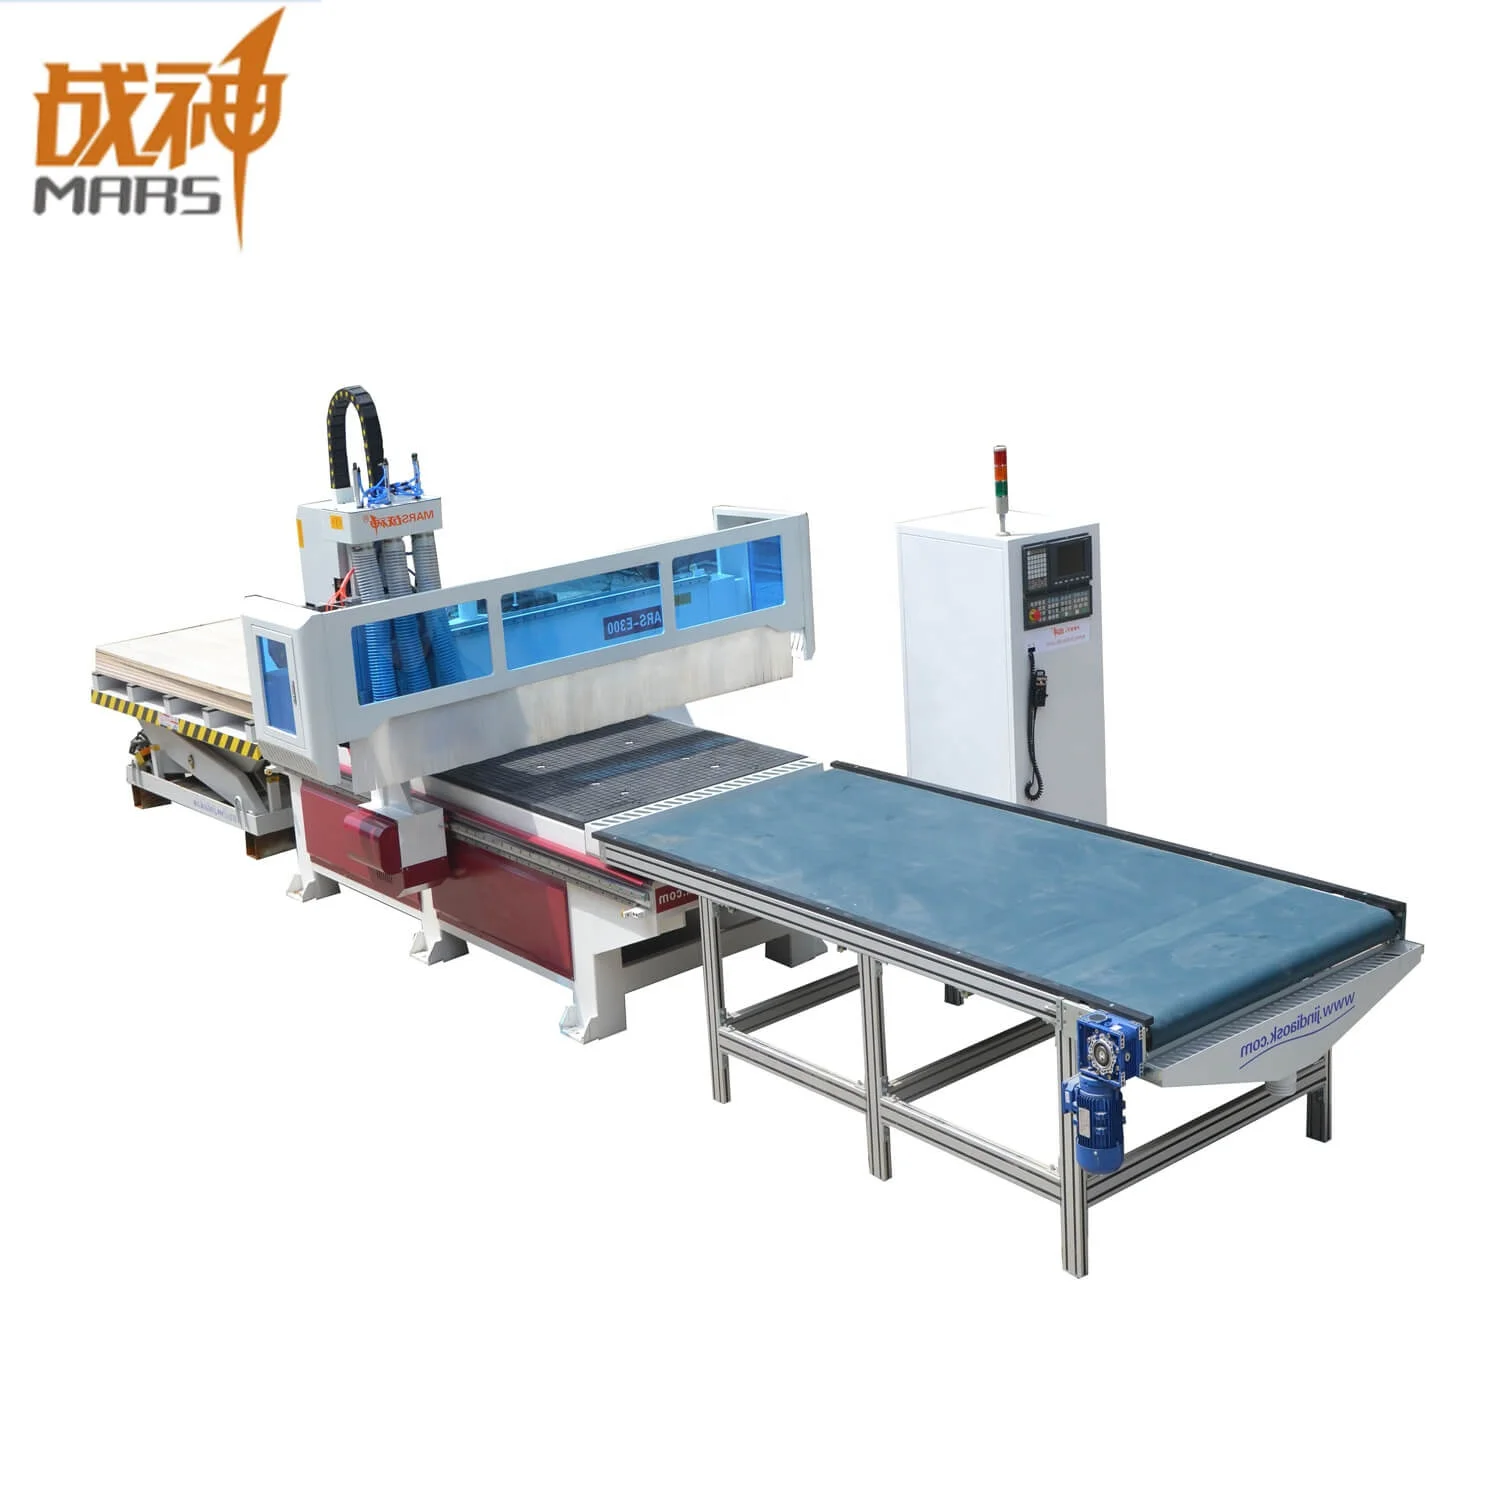 Five Axis Wooden Door Machining Center CNC Woodworking Routers For Sale (1600694095897)